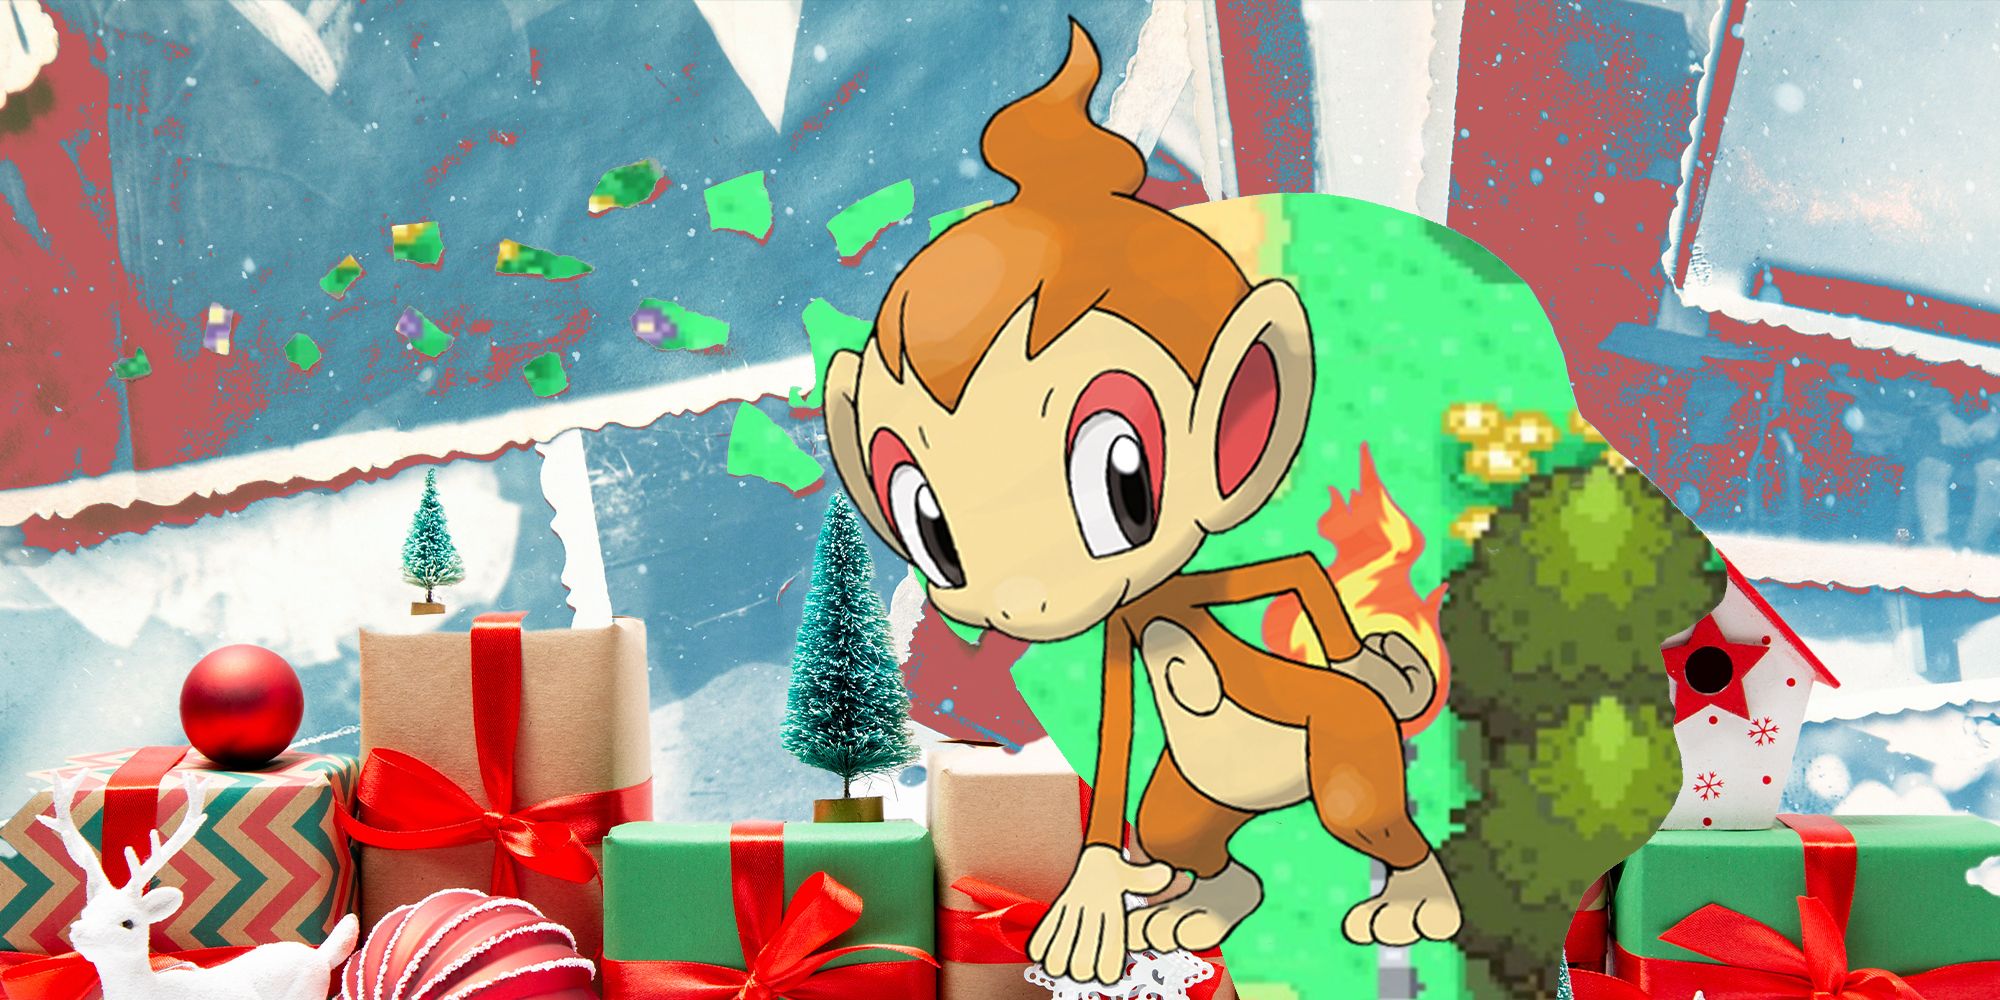 Chimchar surrounded by Christmas presents and other winter decor.